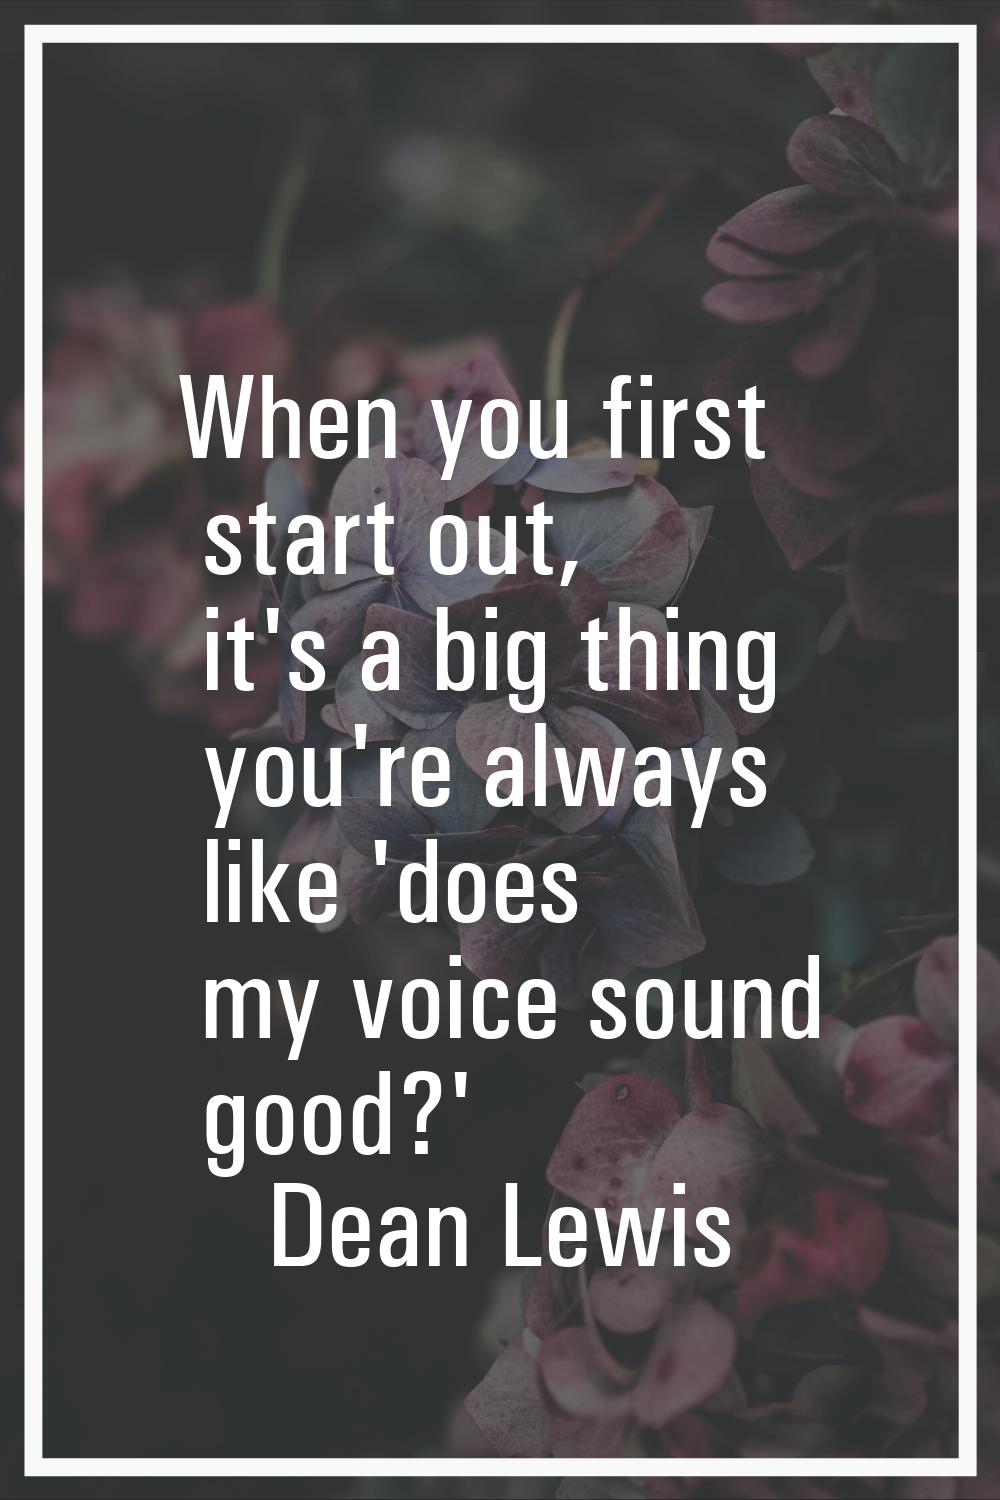 When you first start out, it's a big thing you're always like 'does my voice sound good?'